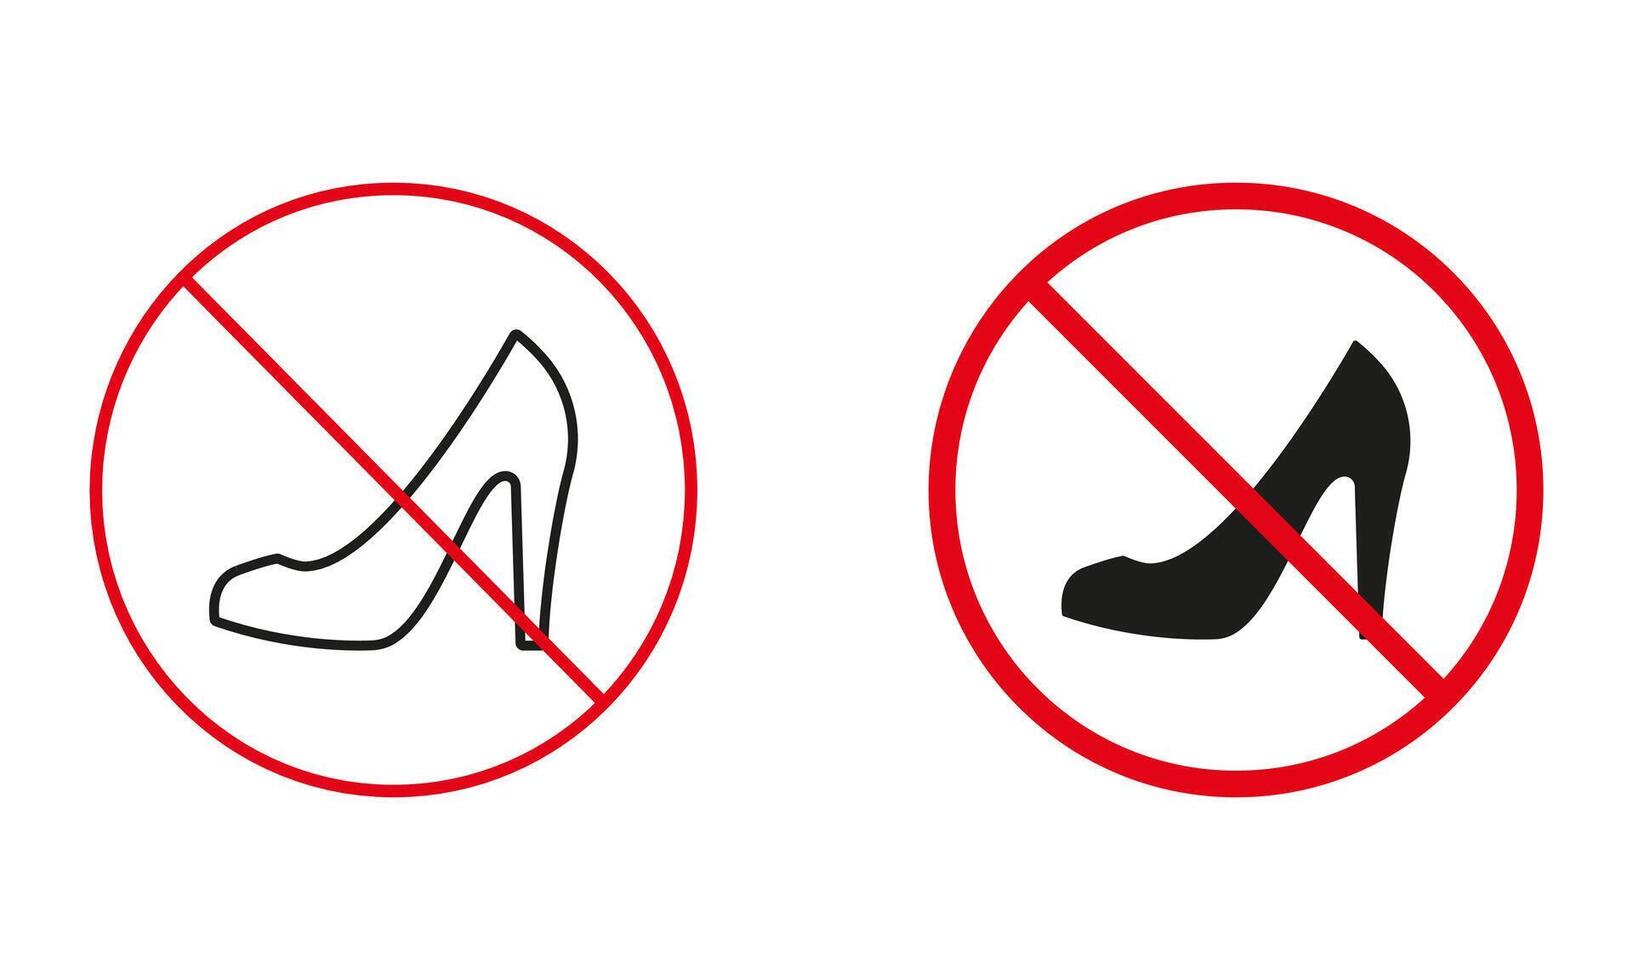 High Heels Not Allowed, Female Pair Shoes Warning Sign Set. Women Shoe Prohibit, Elegant Footwear Line and Silhouette Icons. Classic Stiletto Forbidden Symbol. Isolated Vector Illustration